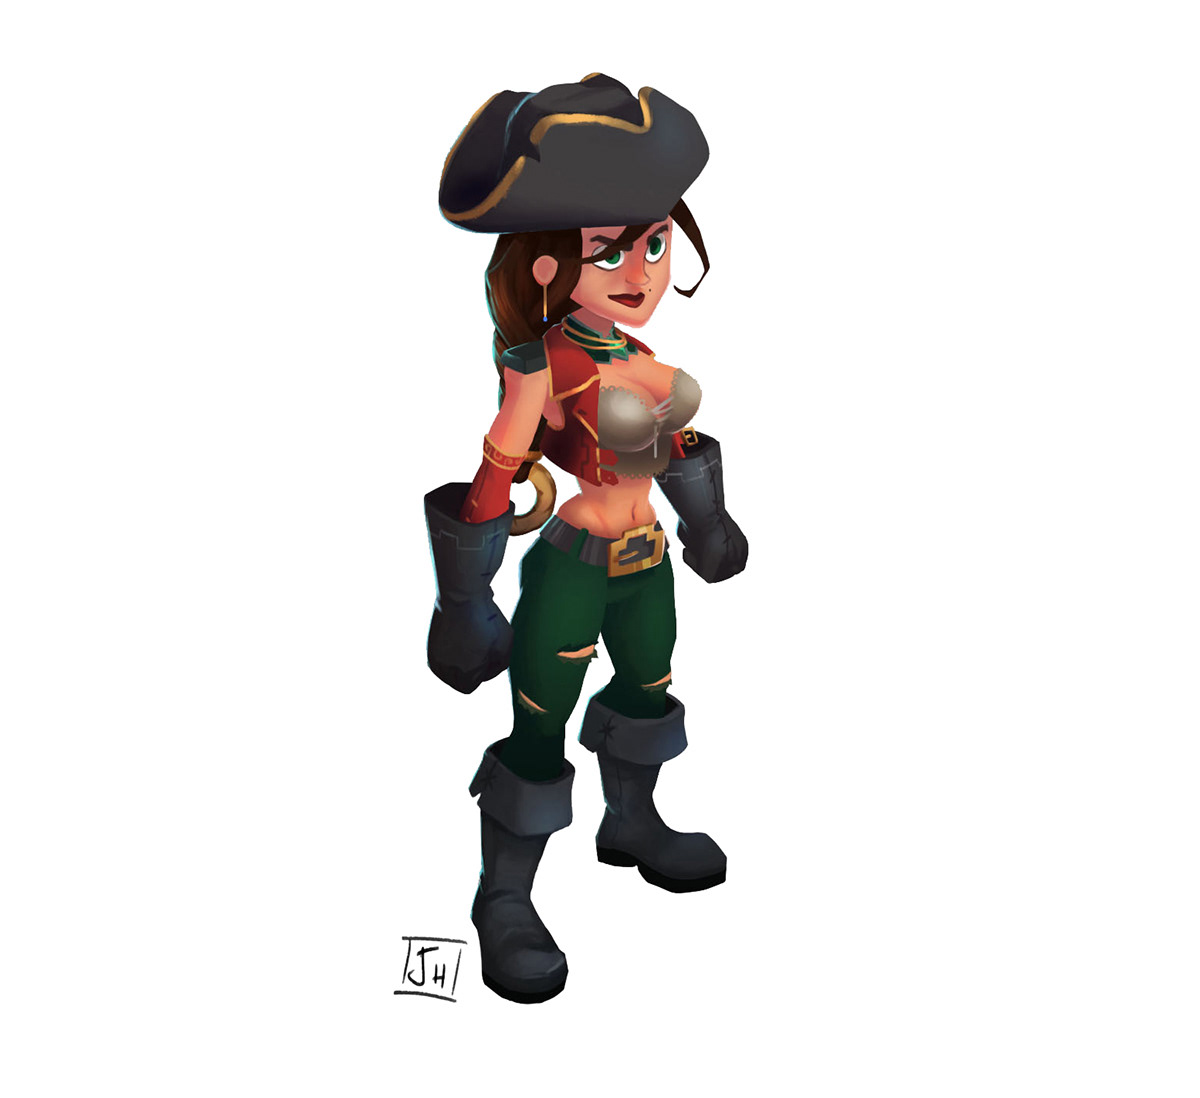 pirate concept art Character design